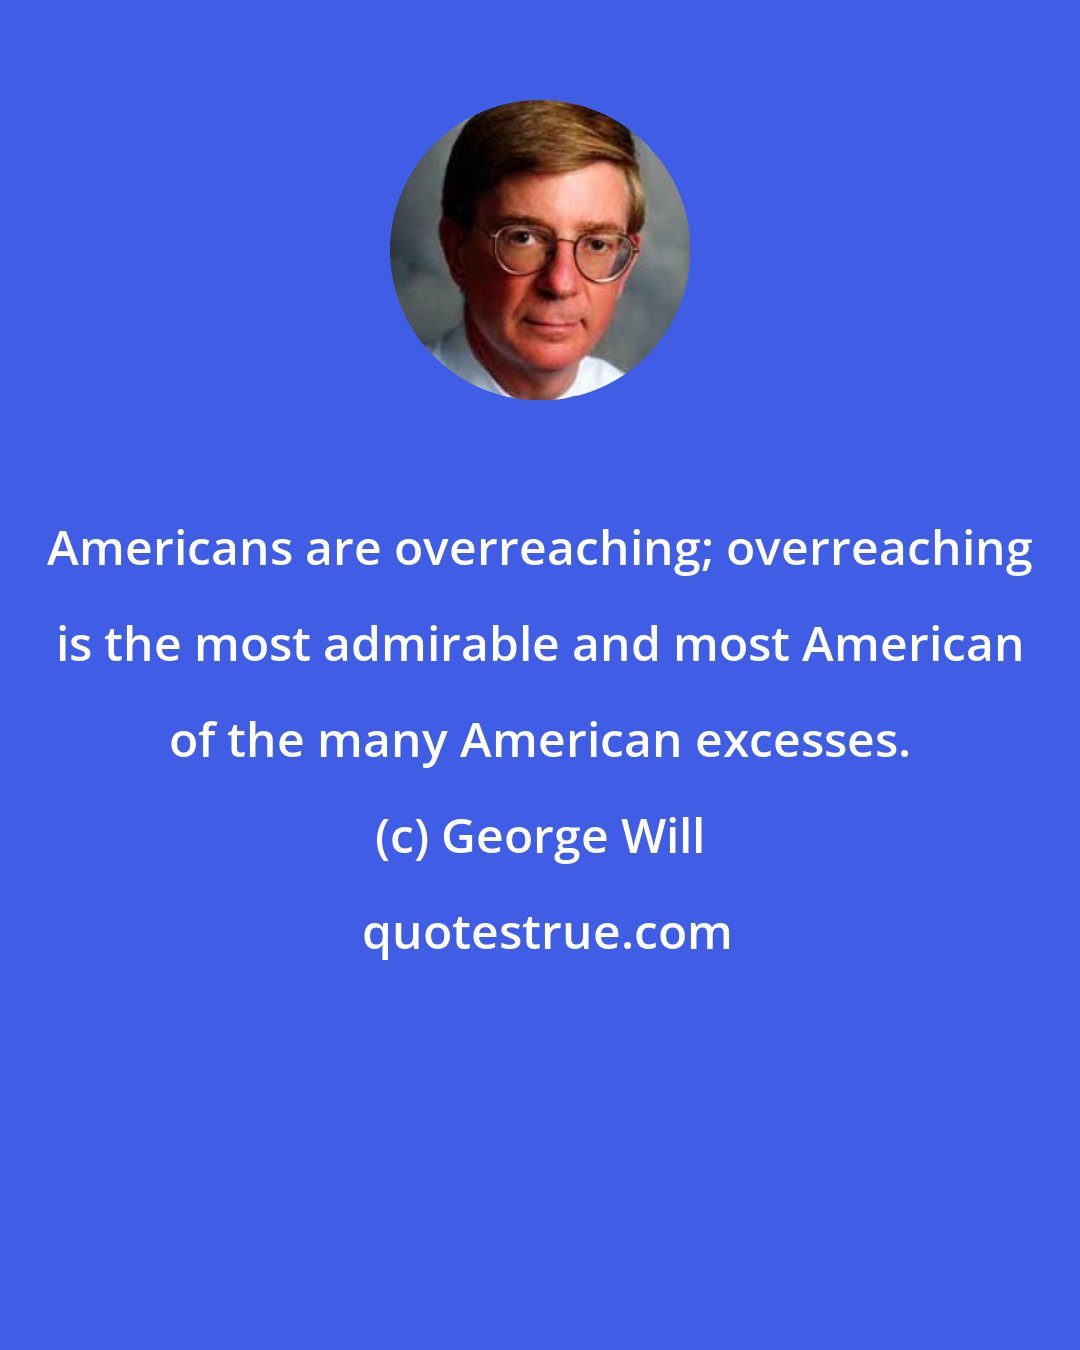 George Will: Americans are overreaching; overreaching is the most admirable and most American of the many American excesses.